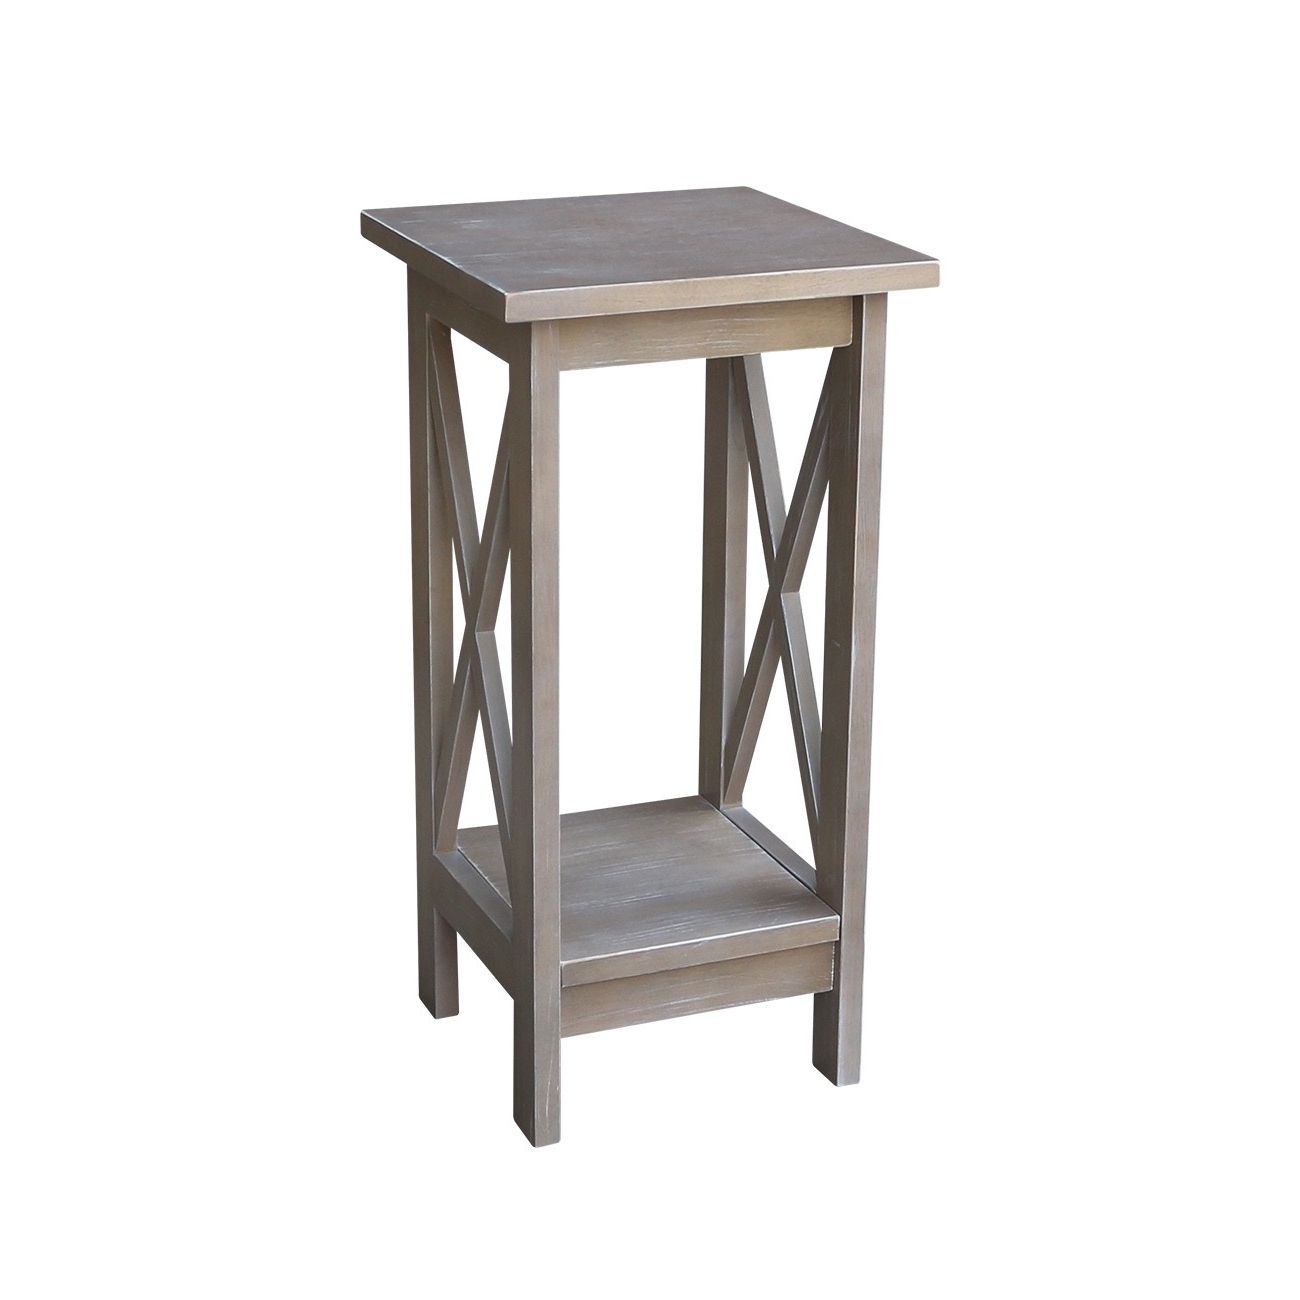 Well Liked Weathered Gray Plant Stands Pertaining To 24" X Sided Plant Stand  Weathered Gray (3 Sizes Available) (View 2 of 10)